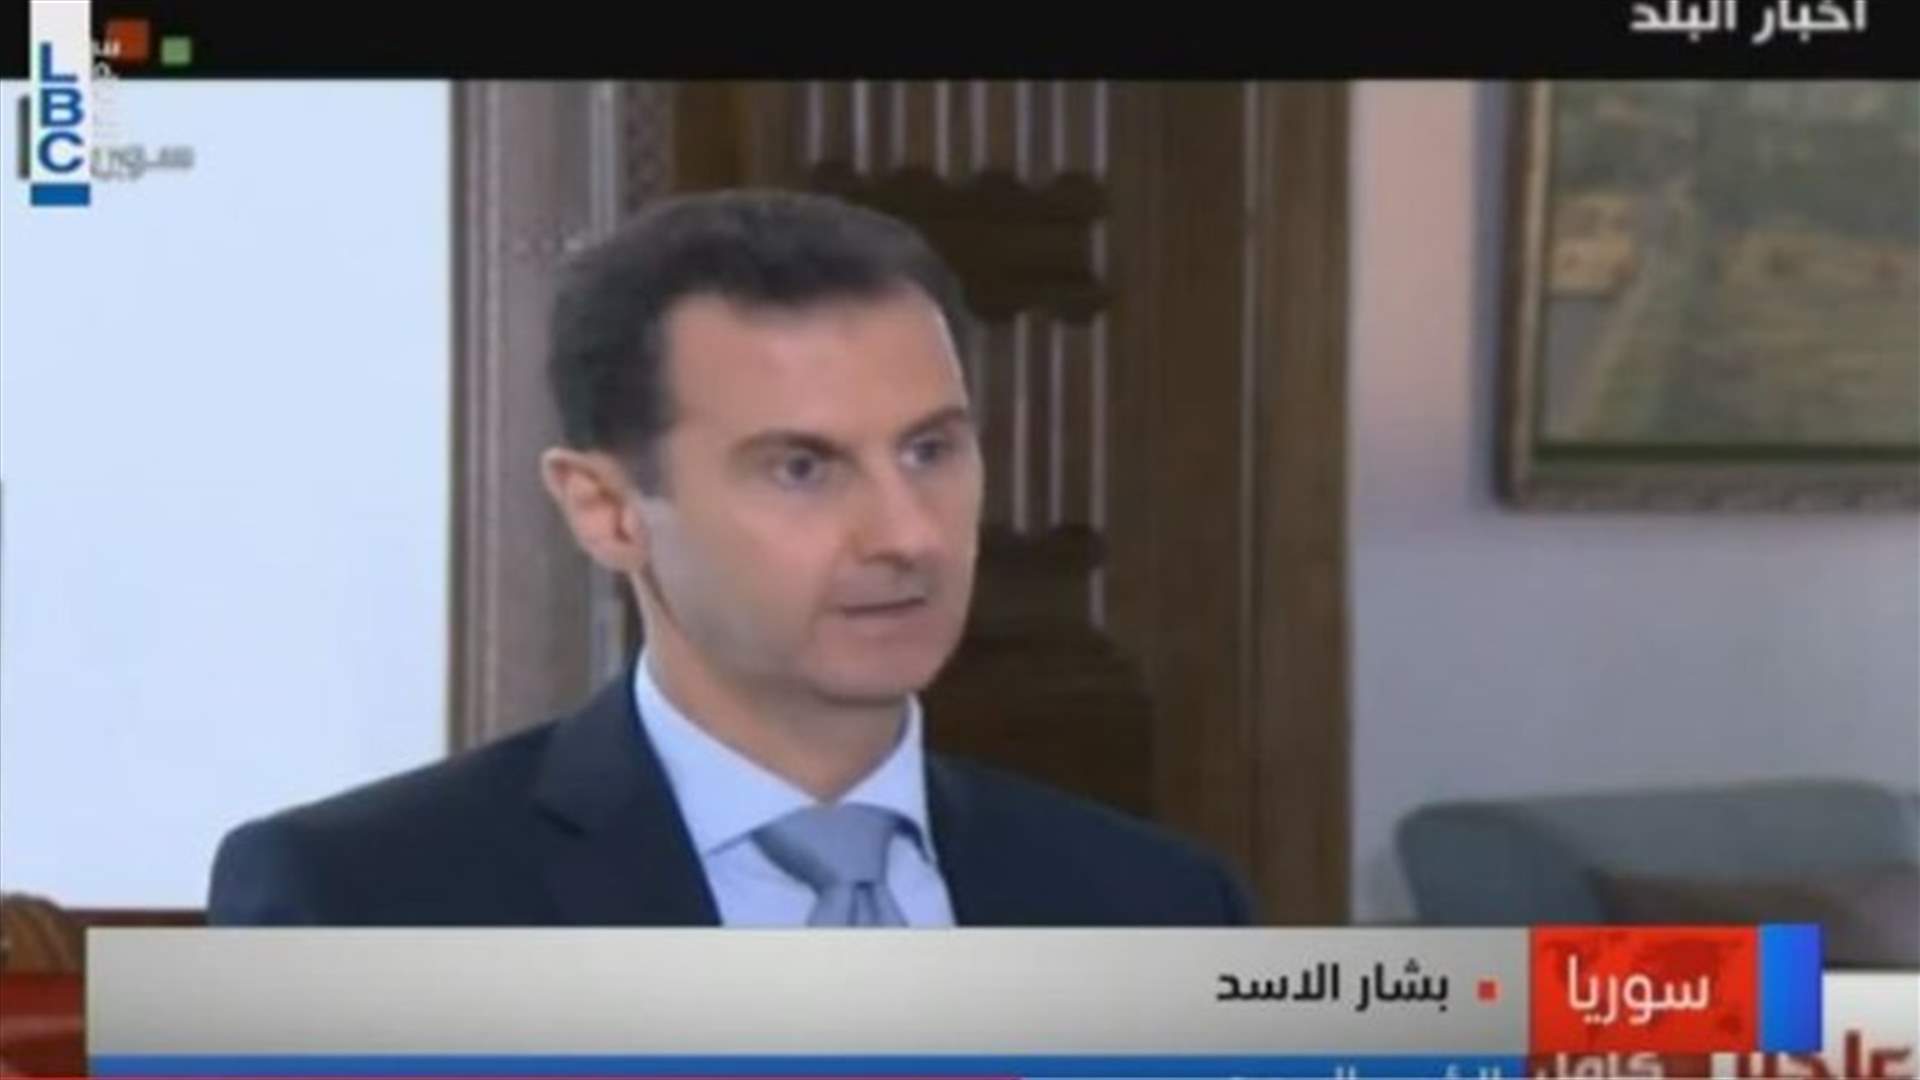 REPORT: Assad says he can form new Syria government with opposition